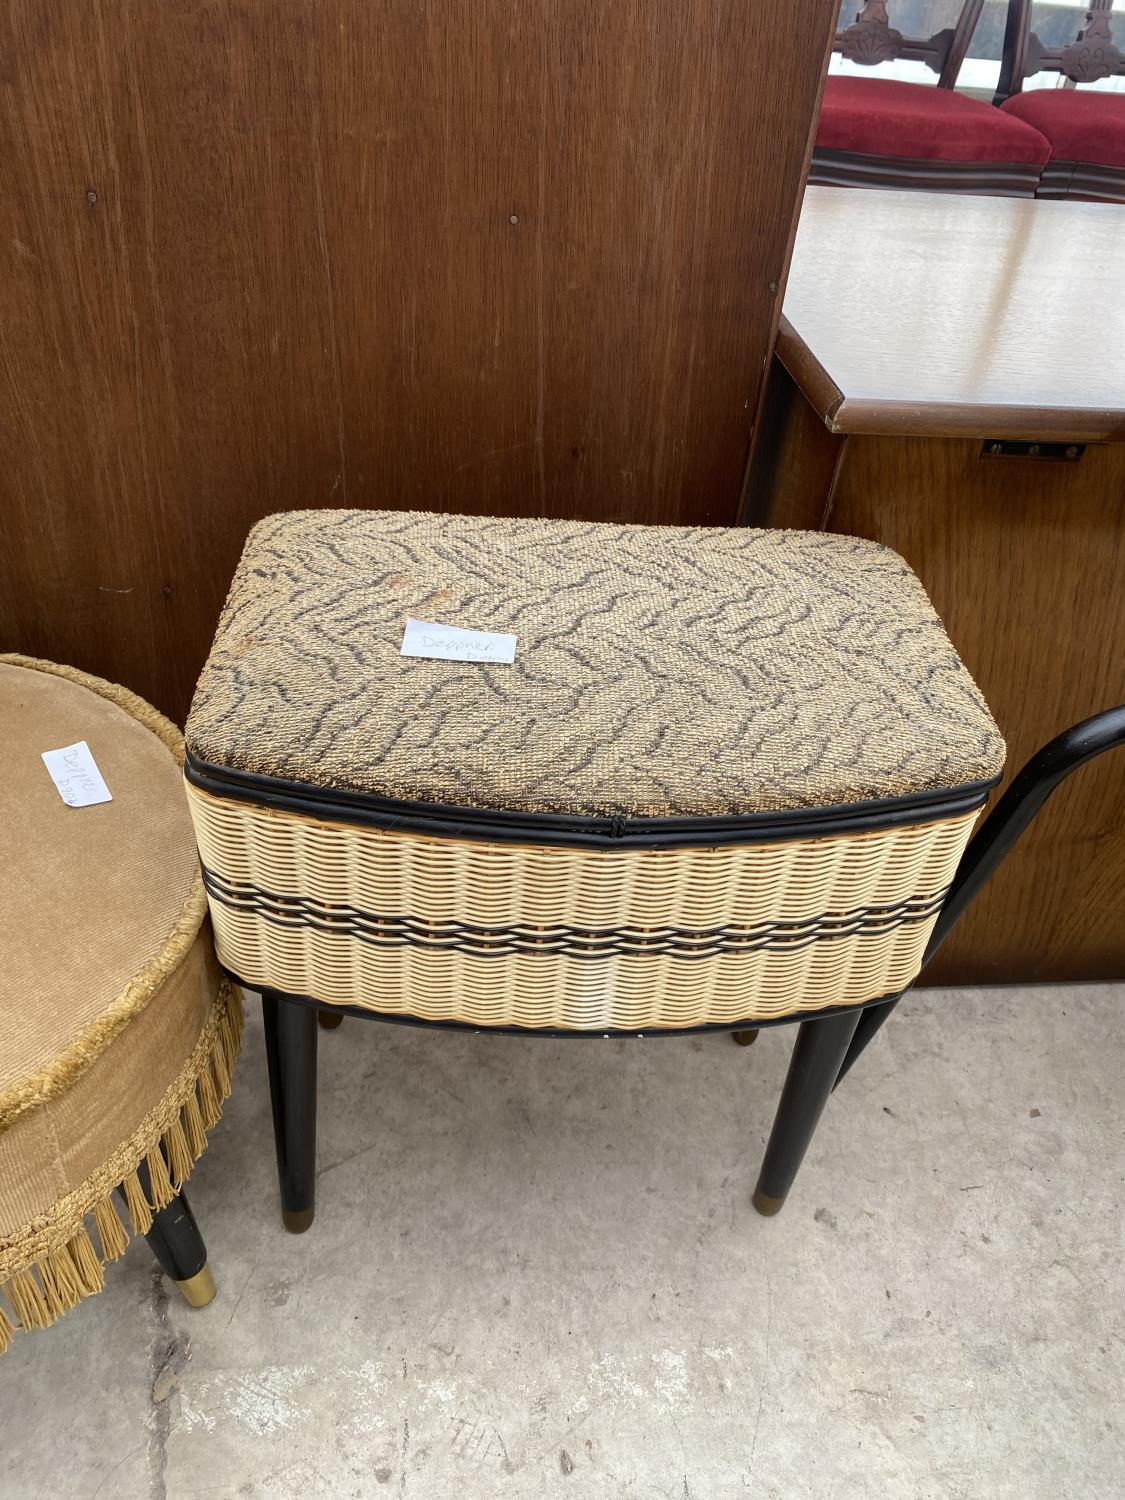 A 1950'S WICKER EFFECT SEWING BOX ON BLACK LEGS AND A KITCHEN CHAIR, LLOYD LOOM OTTOMAN AND AN - Image 3 of 5